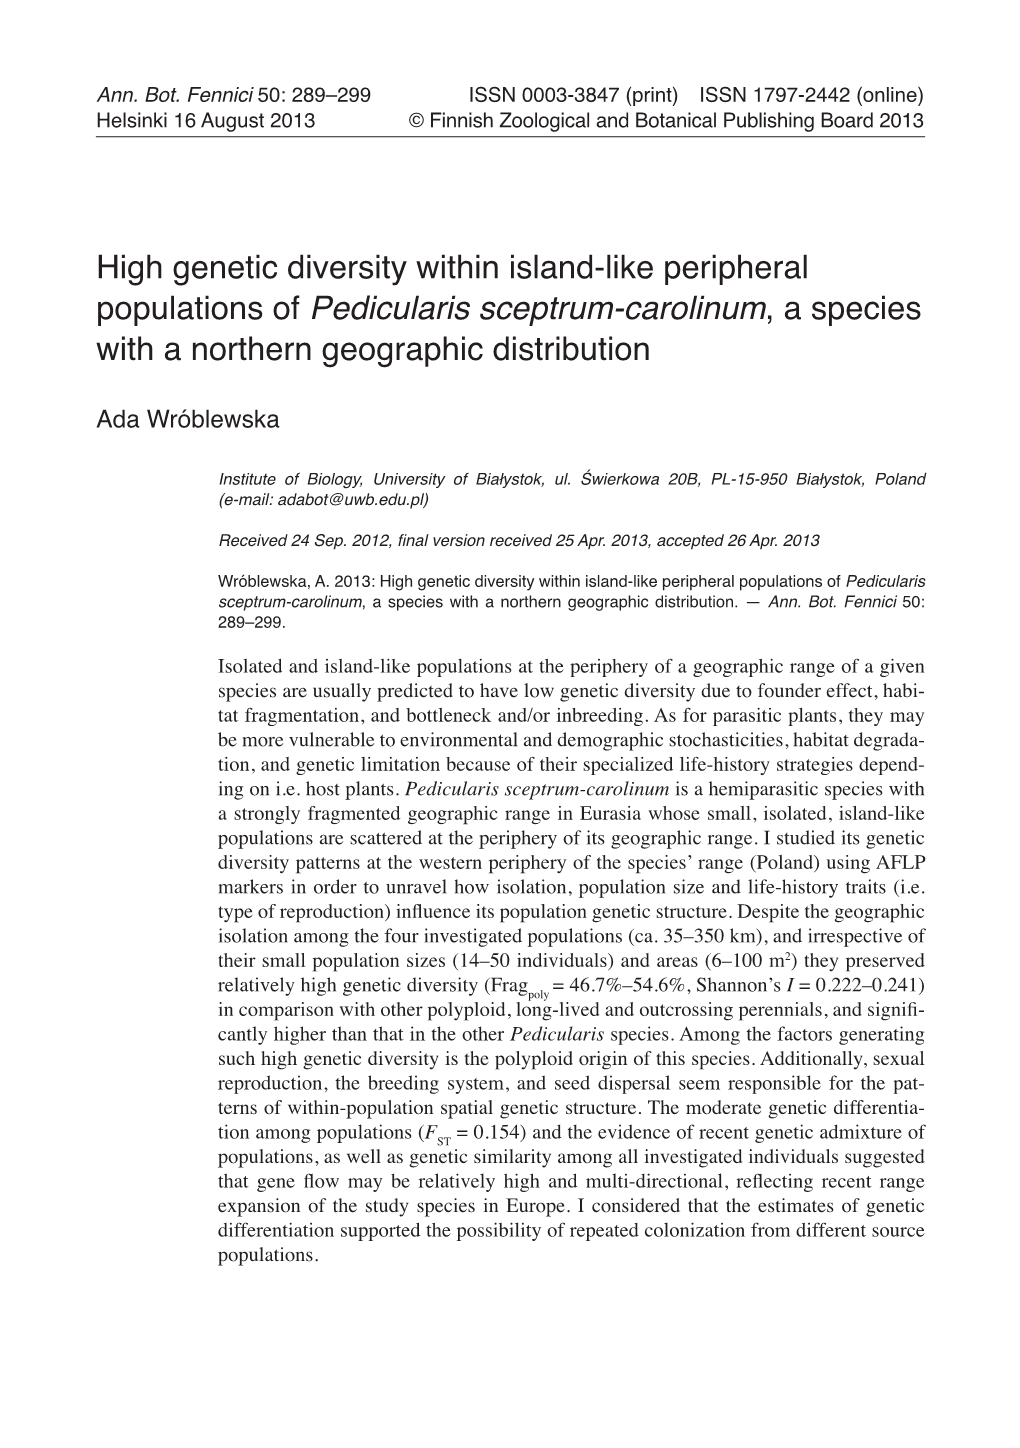 High Genetic Diversity Within Island-Like Peripheral Populations of Pedicularis Sceptrum-Carolinum, a Species with a Northern Geographic Distribution